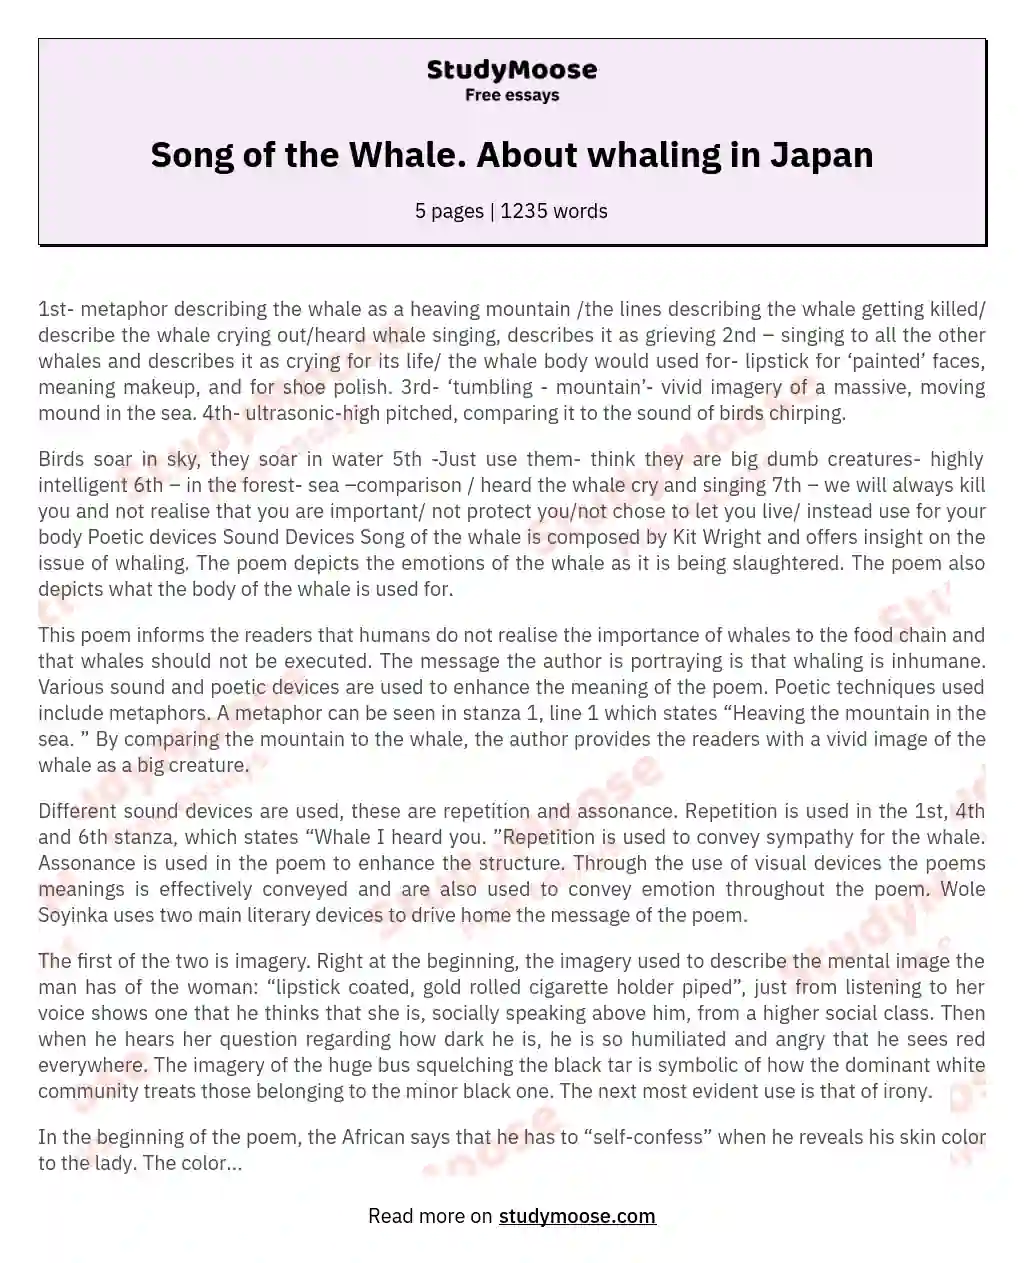 Song of the Whale.  About whaling in Japan essay